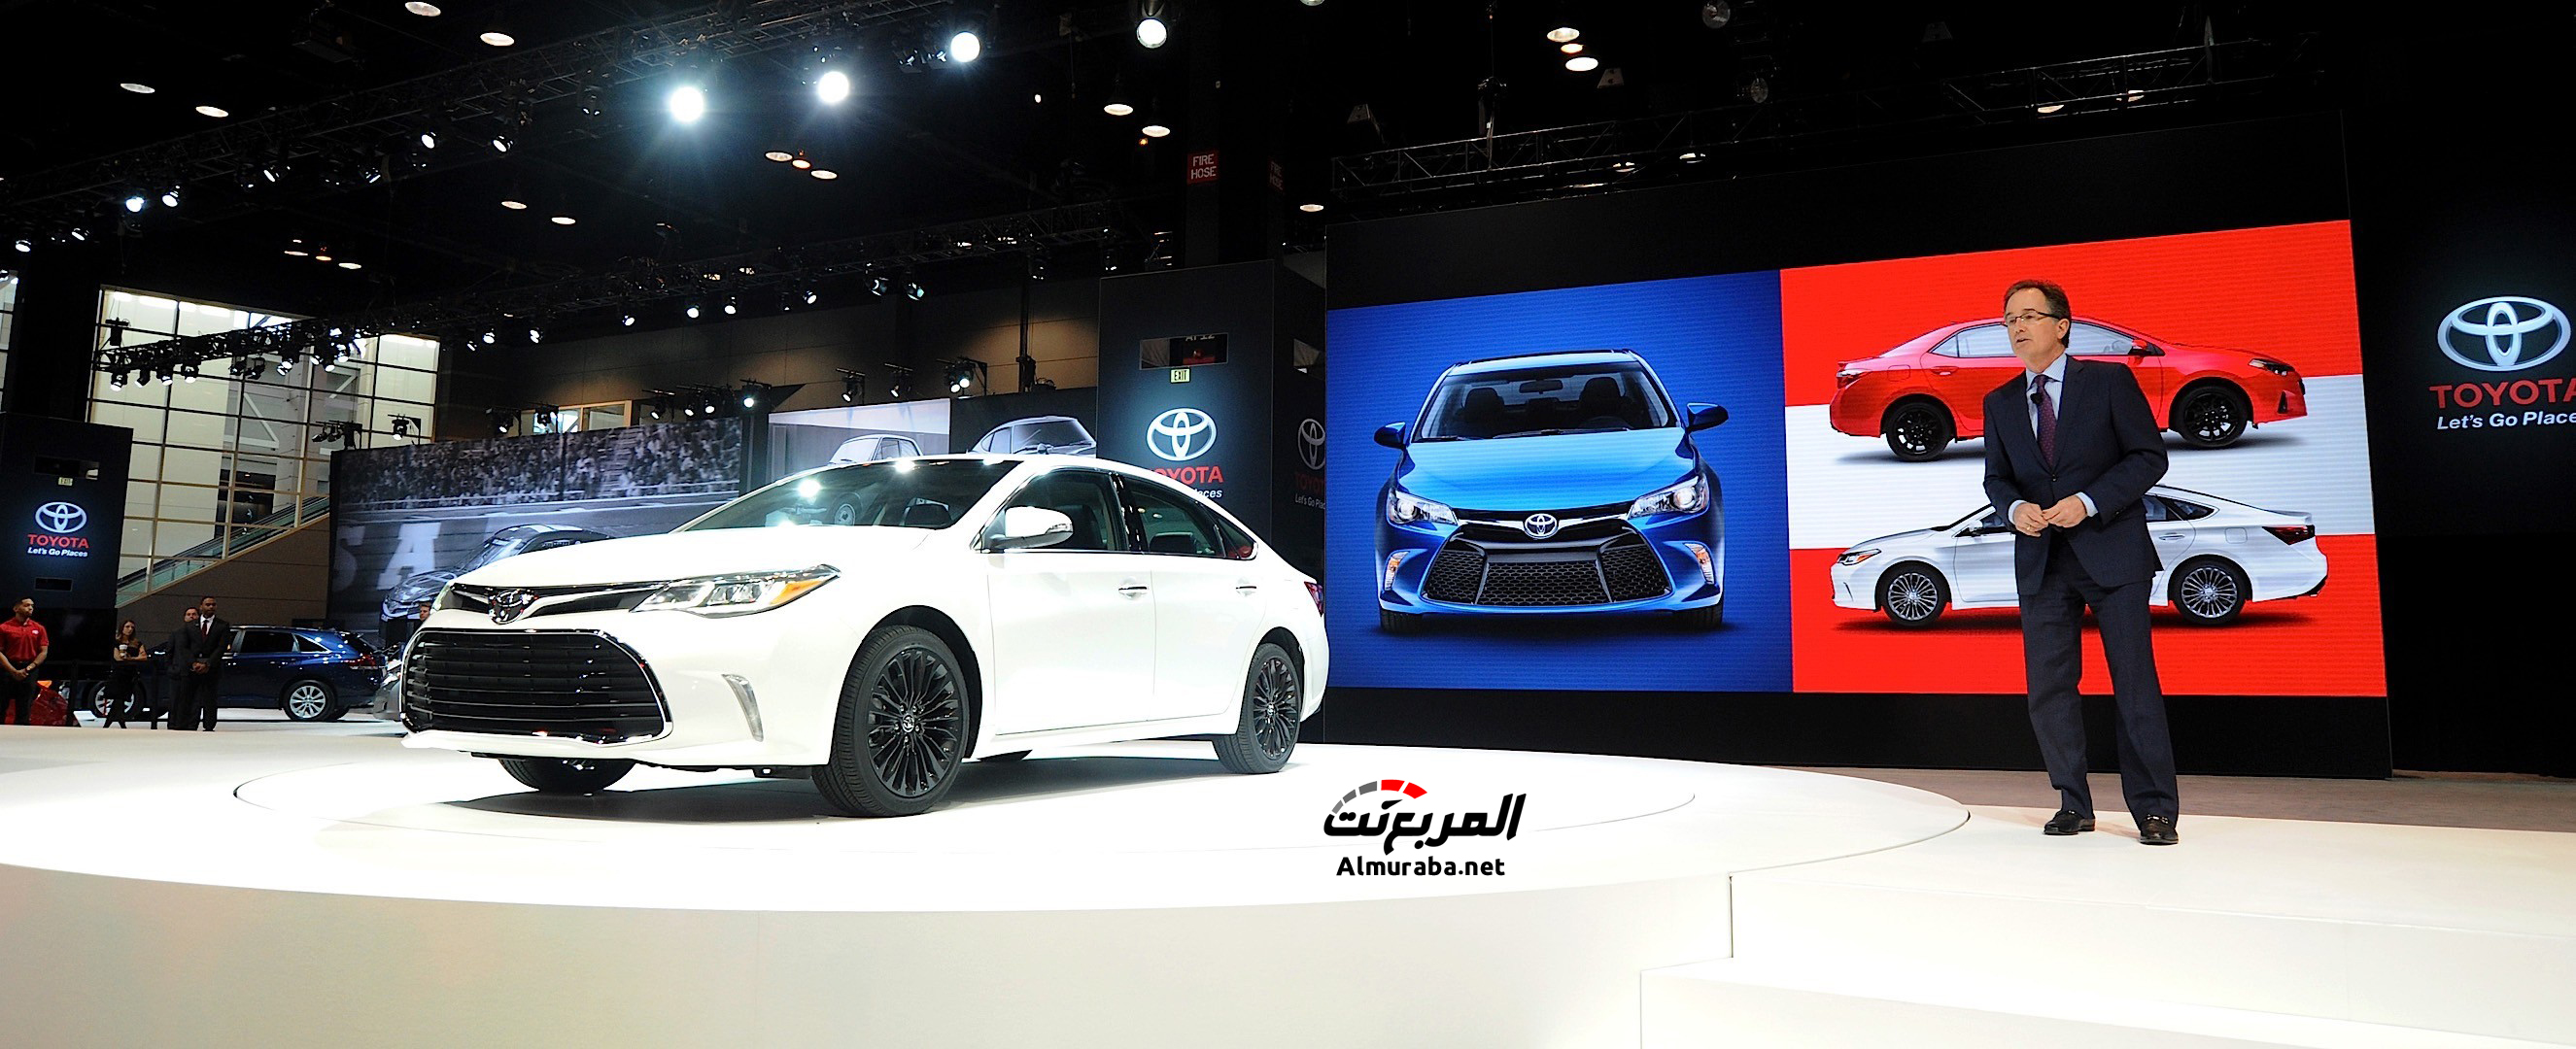 2016-toyota-avalon-shows-off-new-face-at-chicago-auto-show-live-photos_3